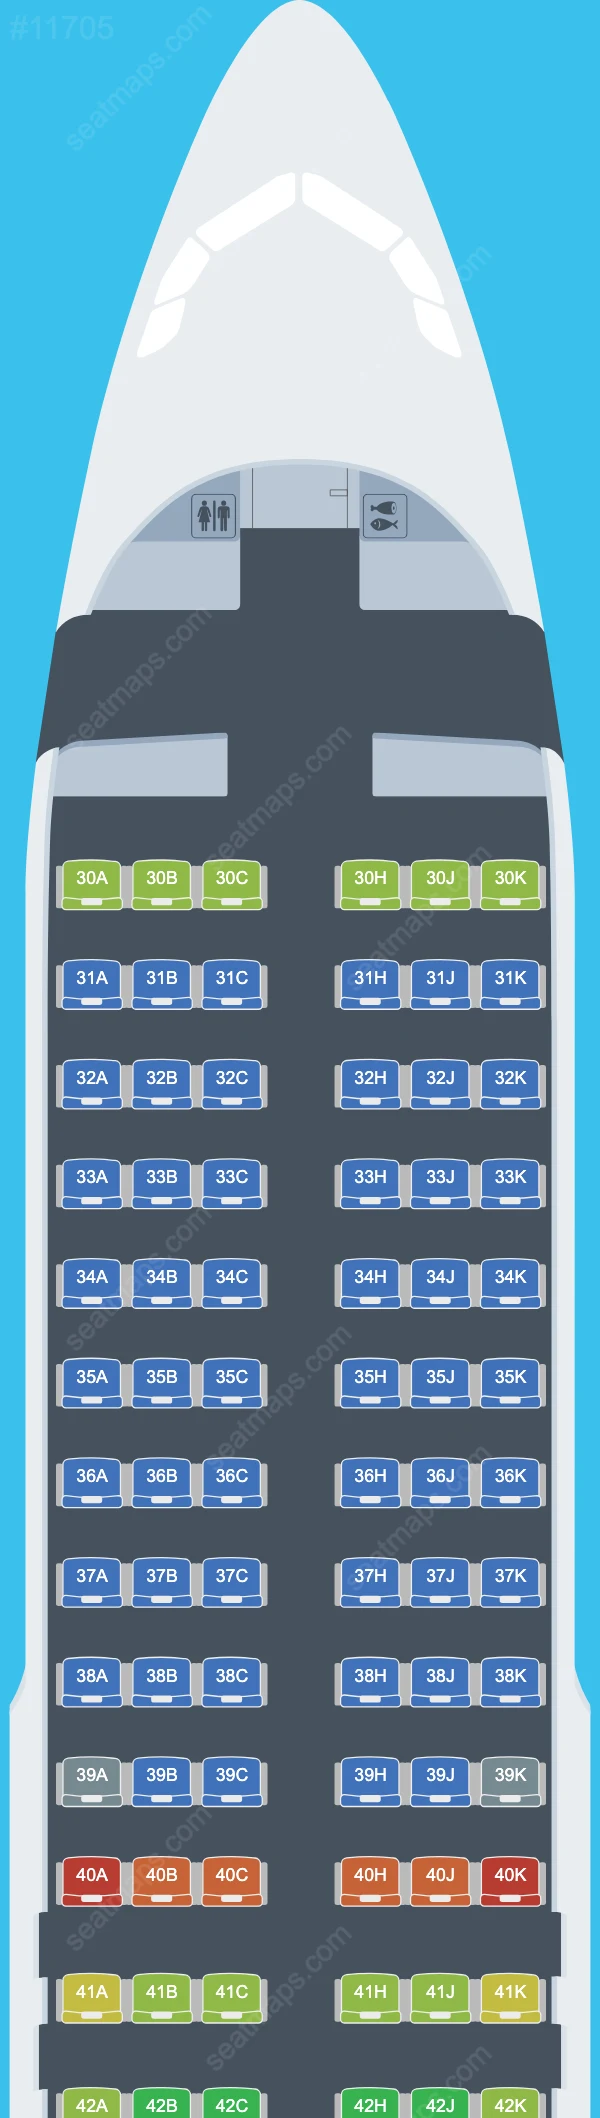 Sichuan Airlines Airbus A320neo aircraft seat map  A320neo V.1